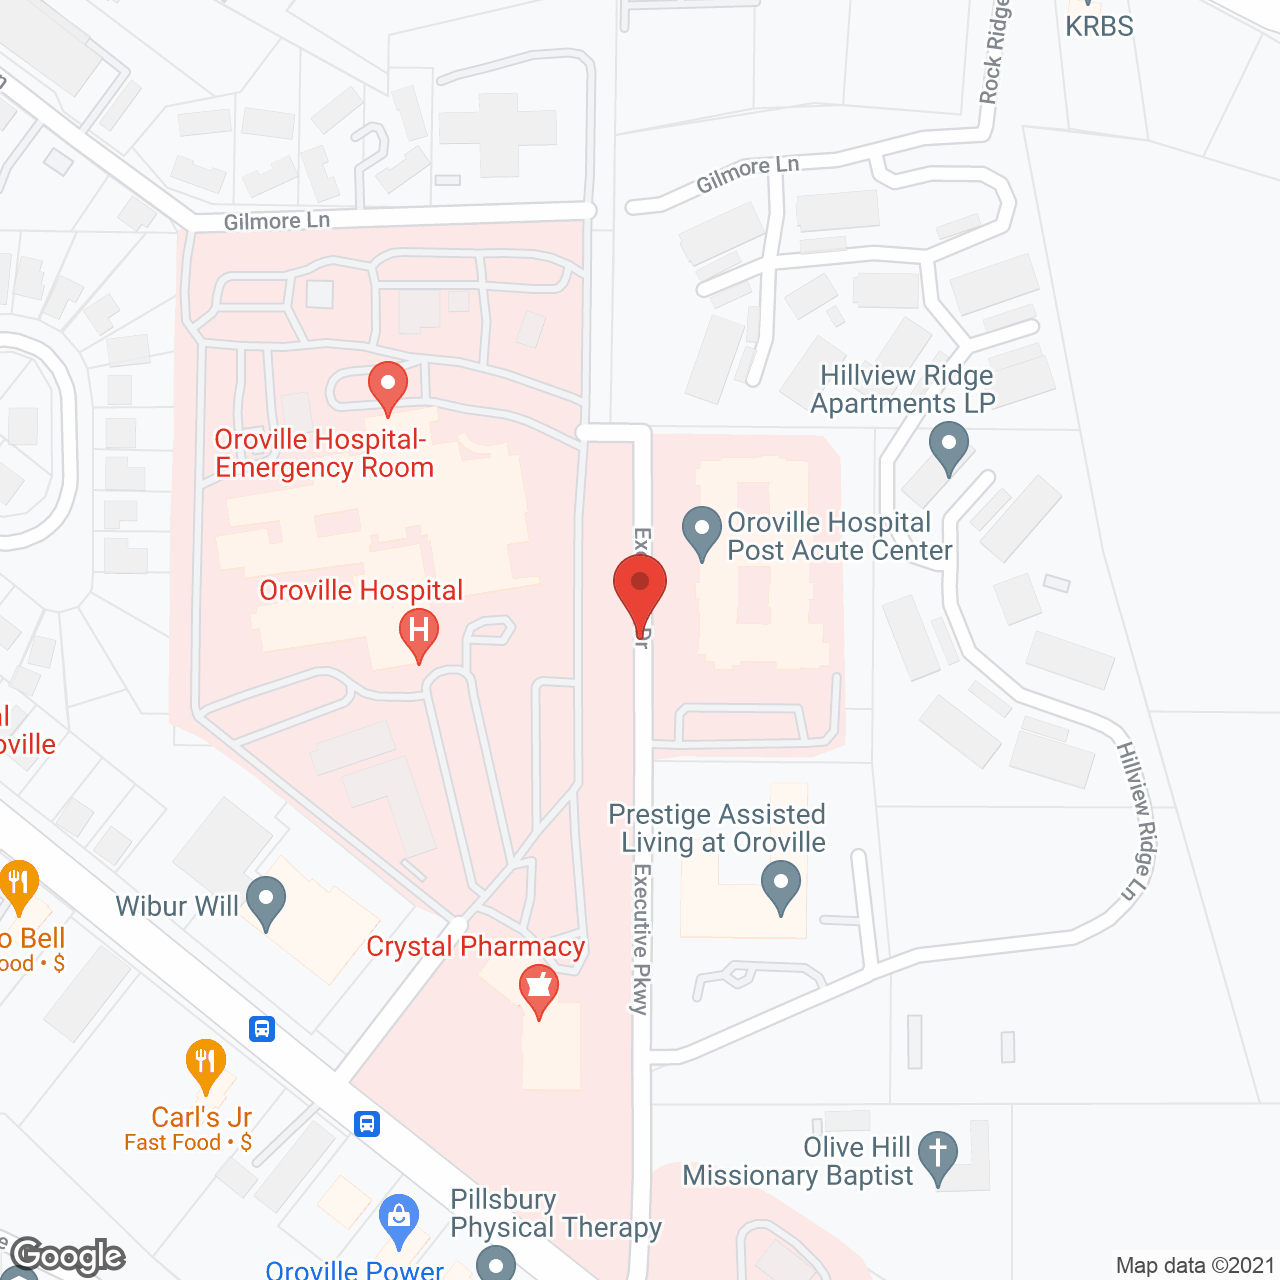 Prestige Assisted Living at Oroville in google map